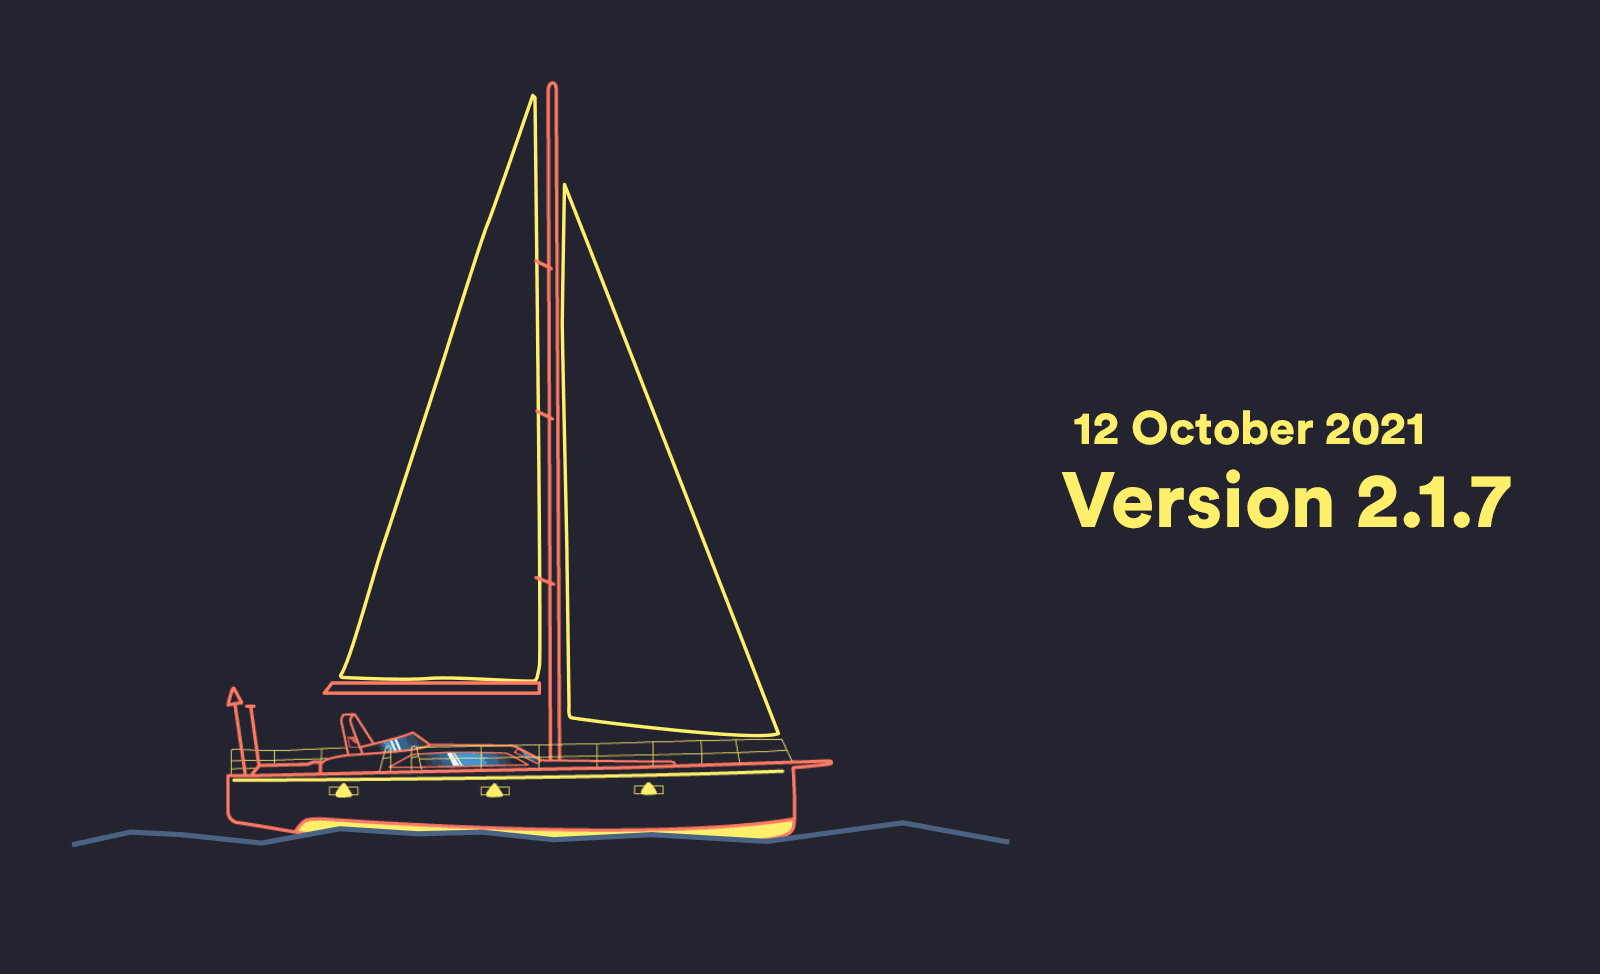 The Up Yacht gracefully sliding across the 2.1.7 release